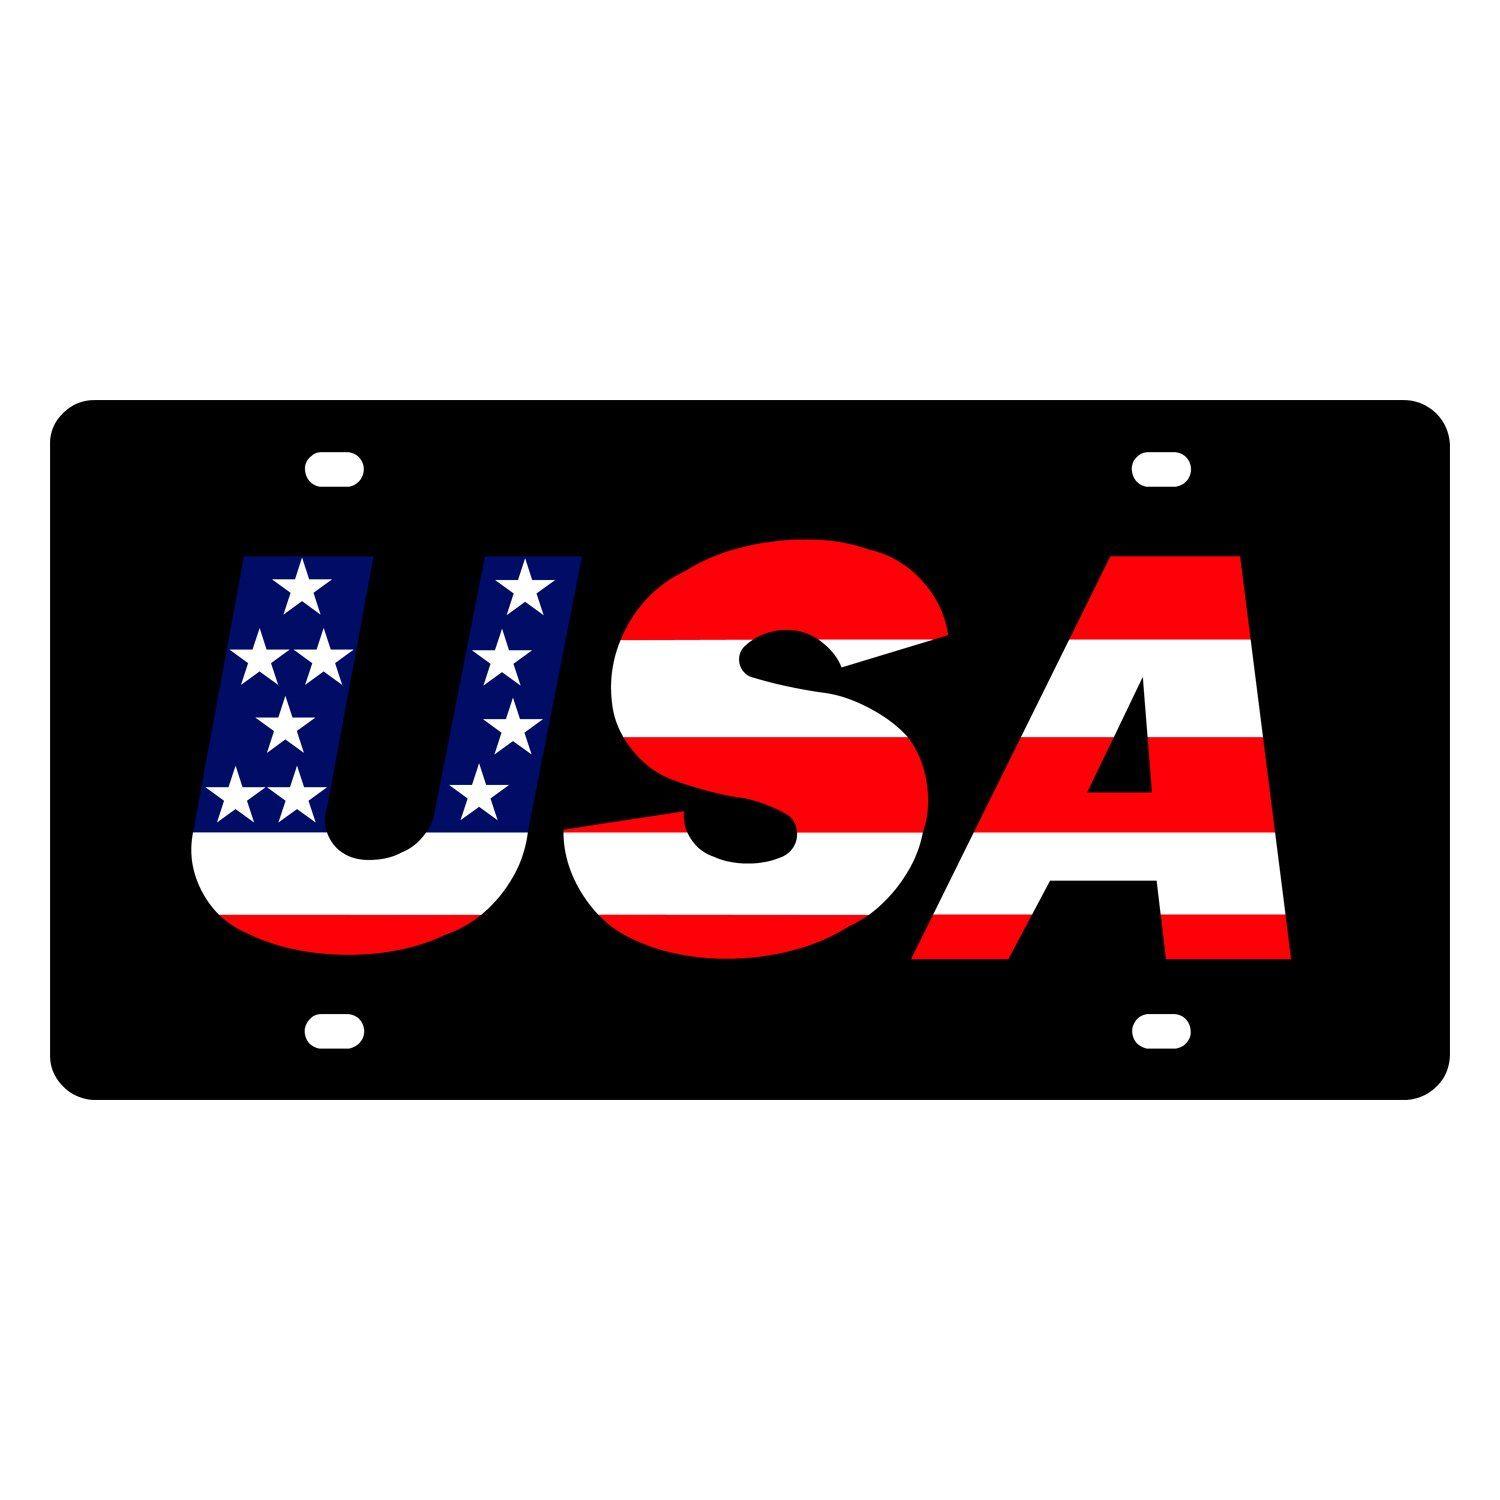 Red and White Stripes Logo - Eurosport Daytona® - LSN License Plate with USA Red / White / Blue ...